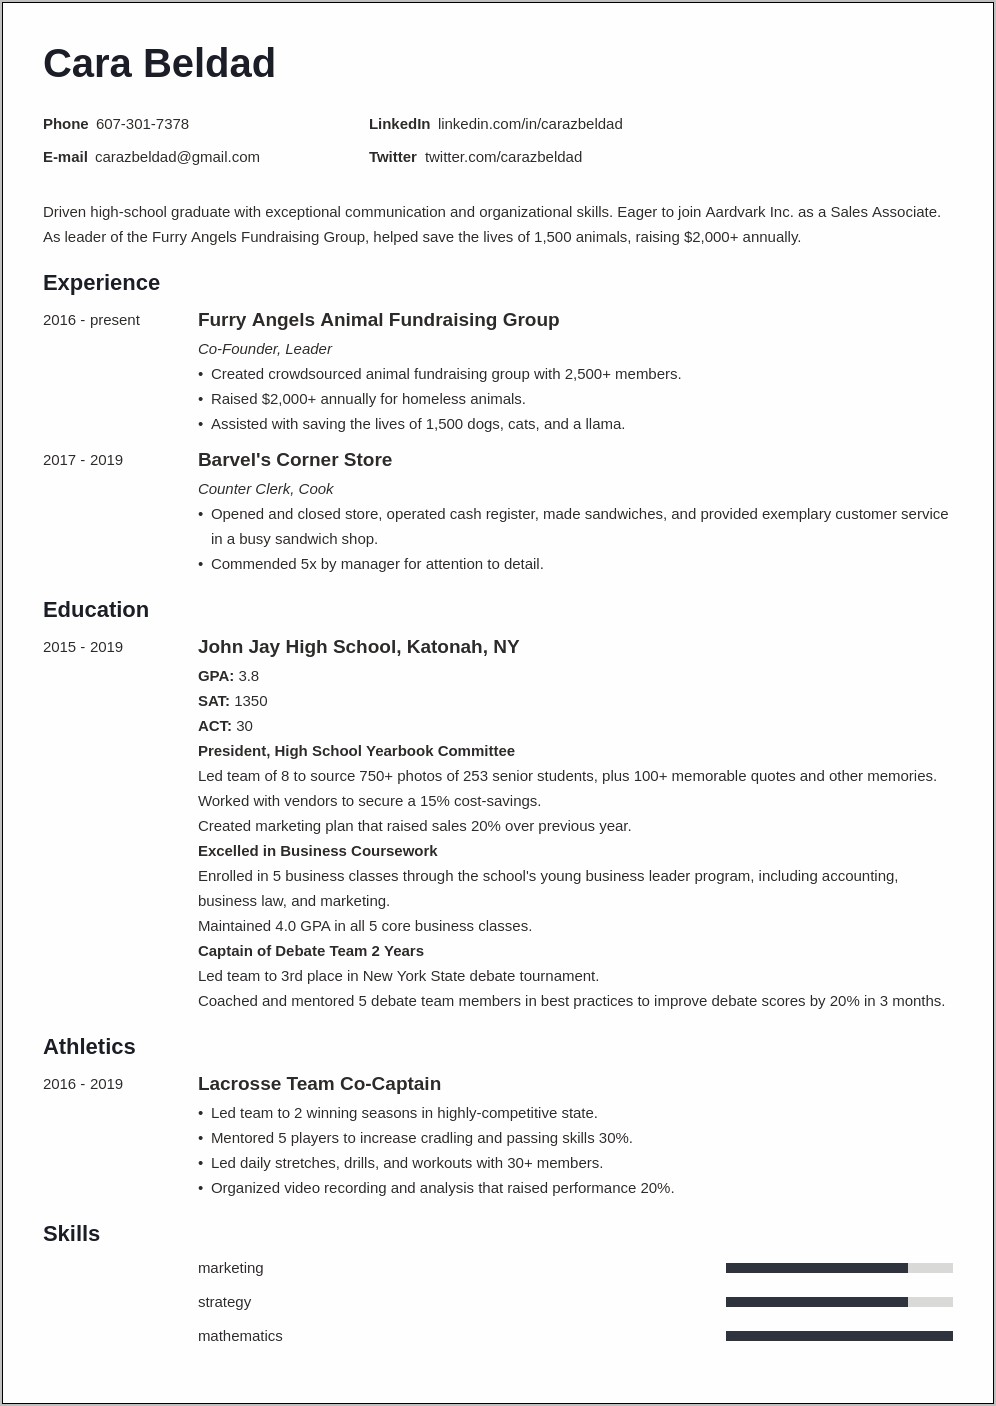 Education On Resume Without High School Diploma